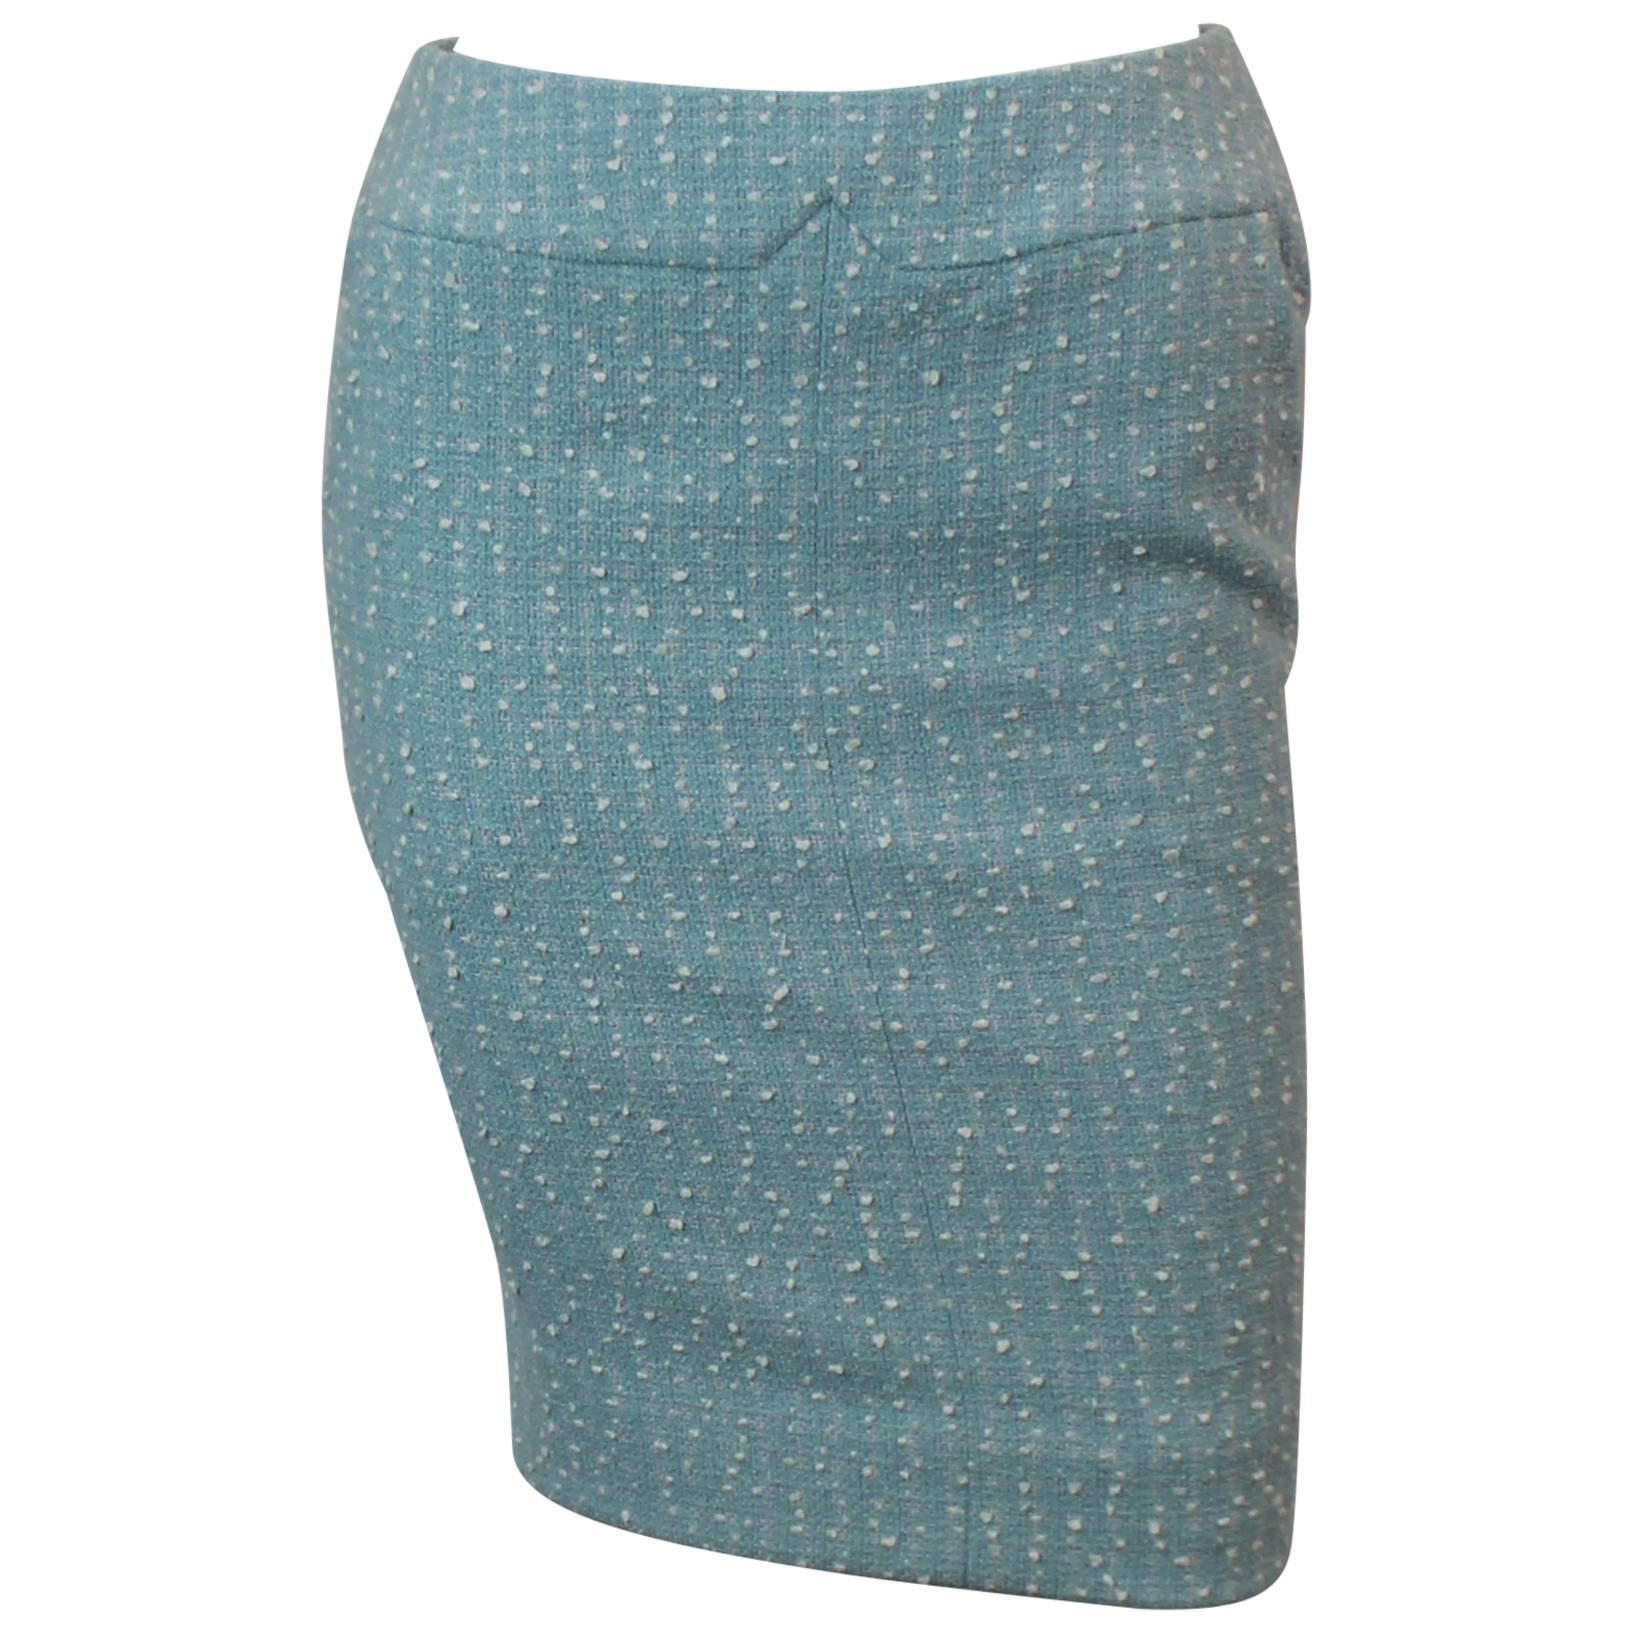 Chanel Light Blue Tweed Tapered Wool Blend Skirt - 38 - 1990's